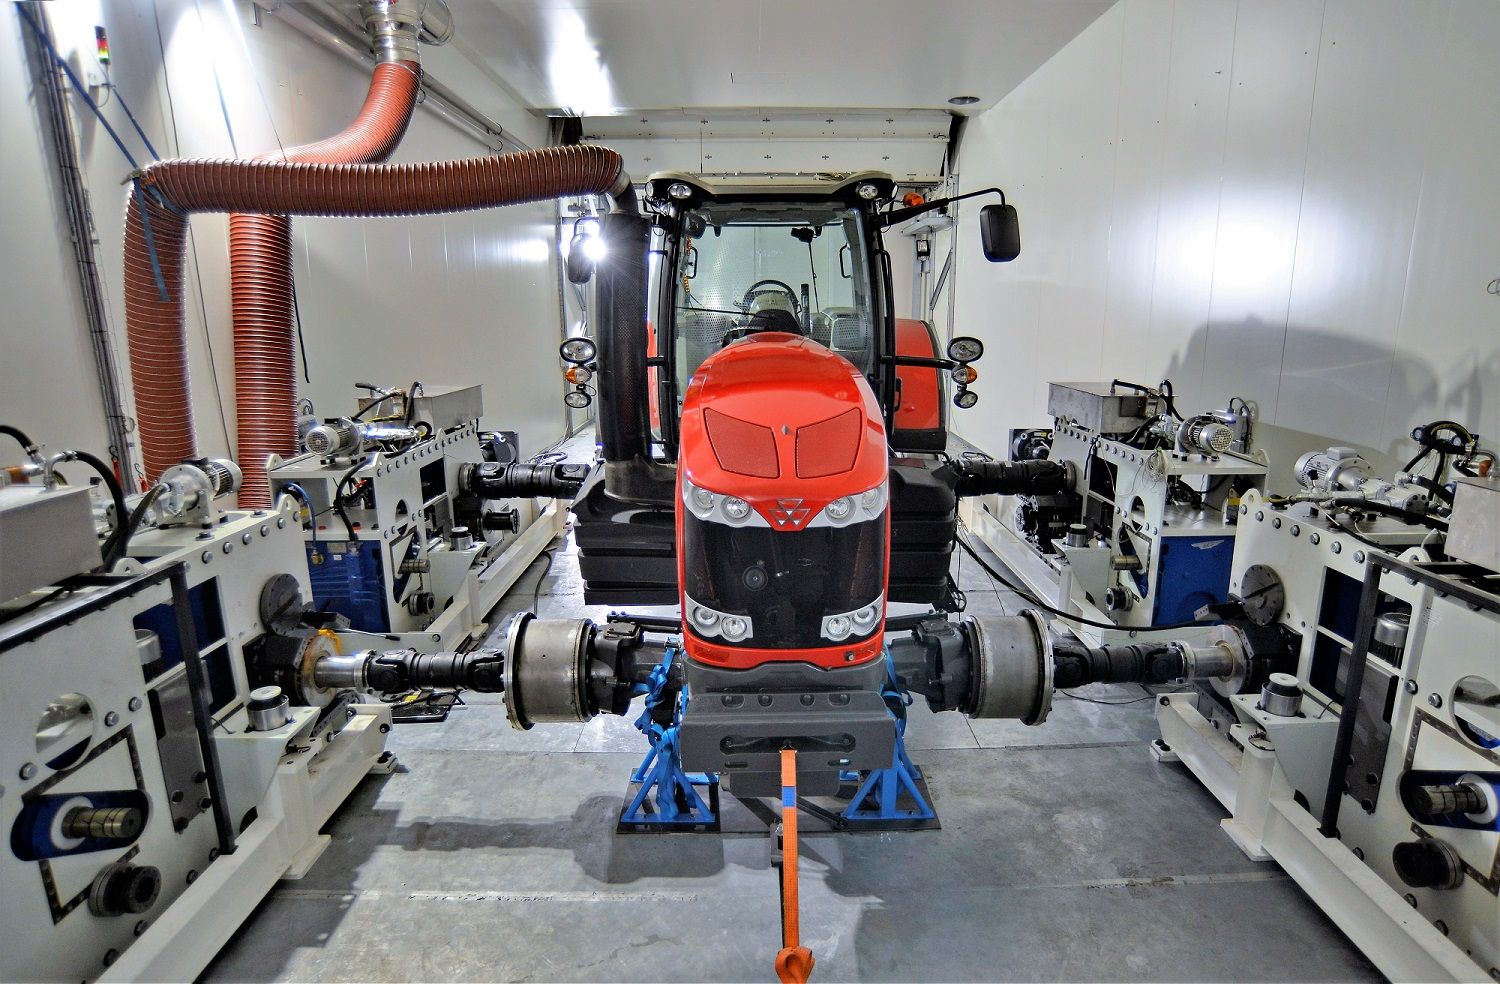 Tractor in the high power test cell